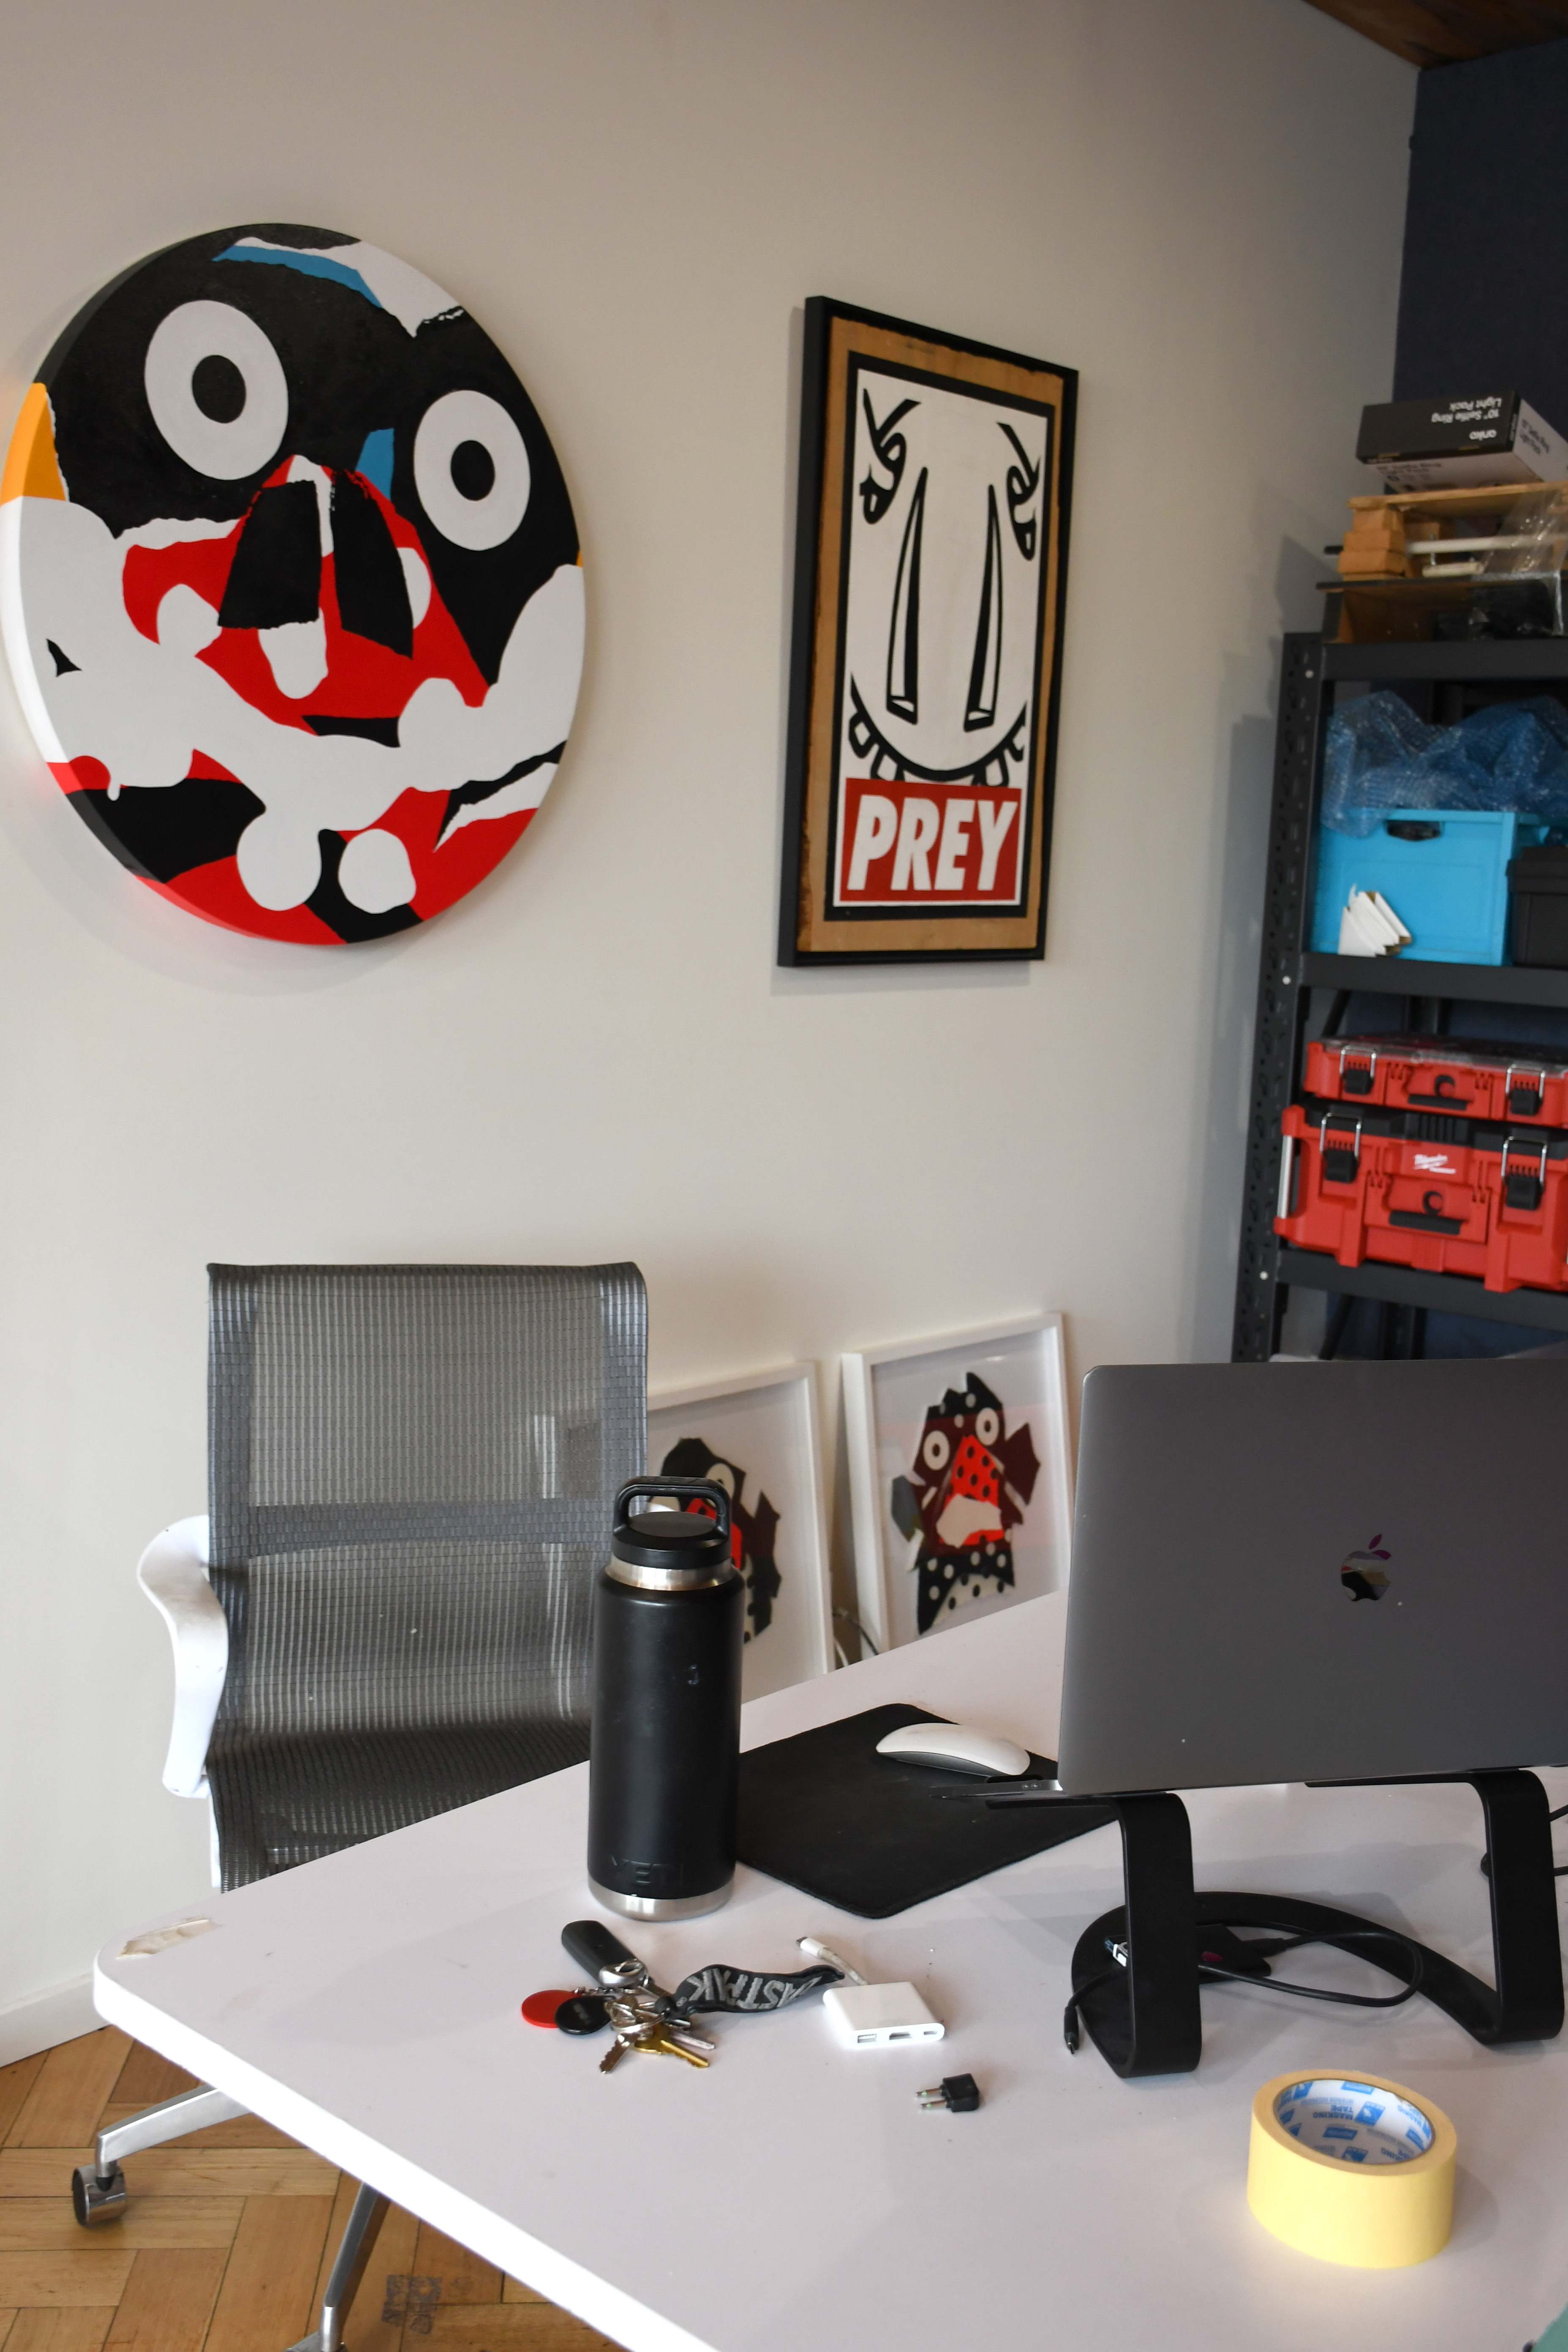 A photo of Mysterious Al's Digital art workspace, including his painted works in the background and computer.